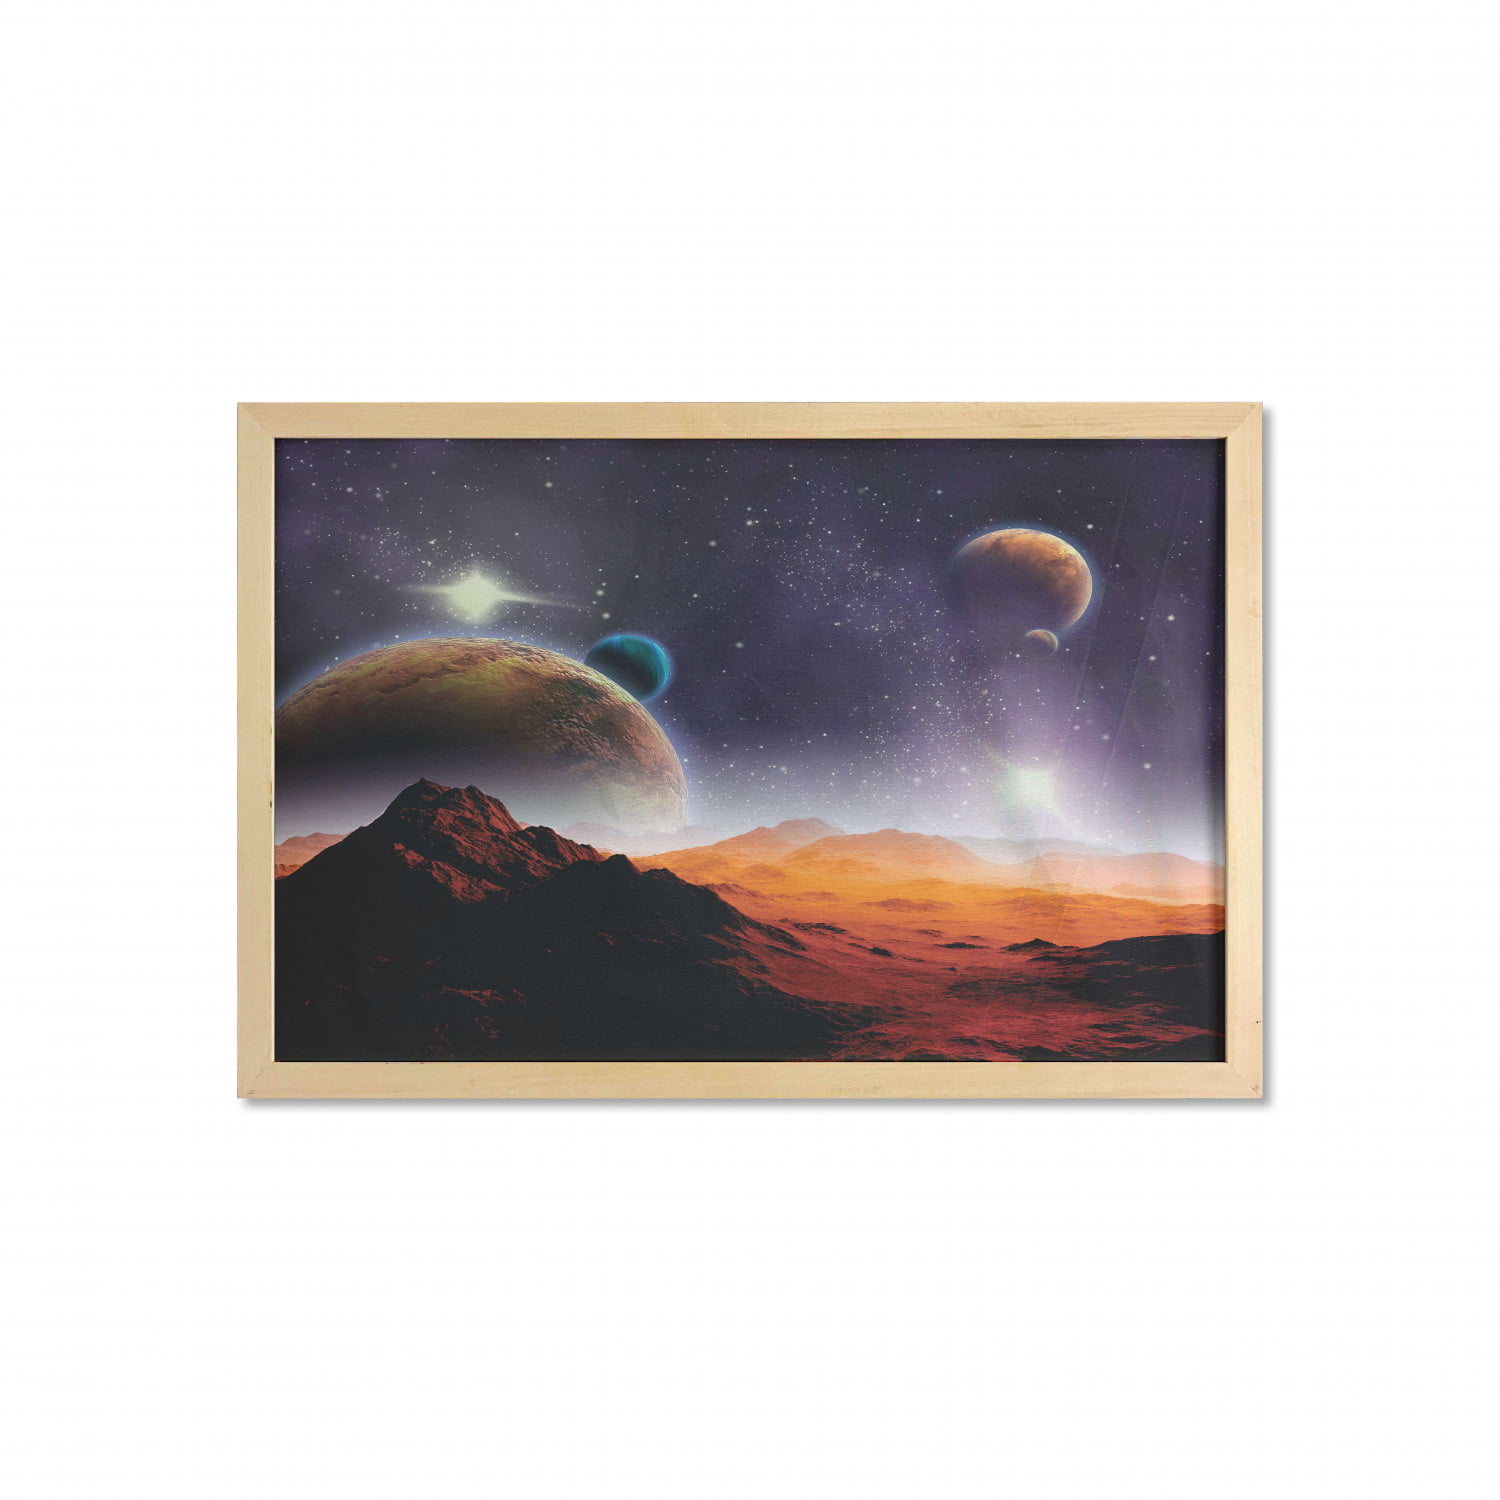 Moon Earth Space Galaxy Universe Home Decor Wall Art Canvas Picture 20x24inch 